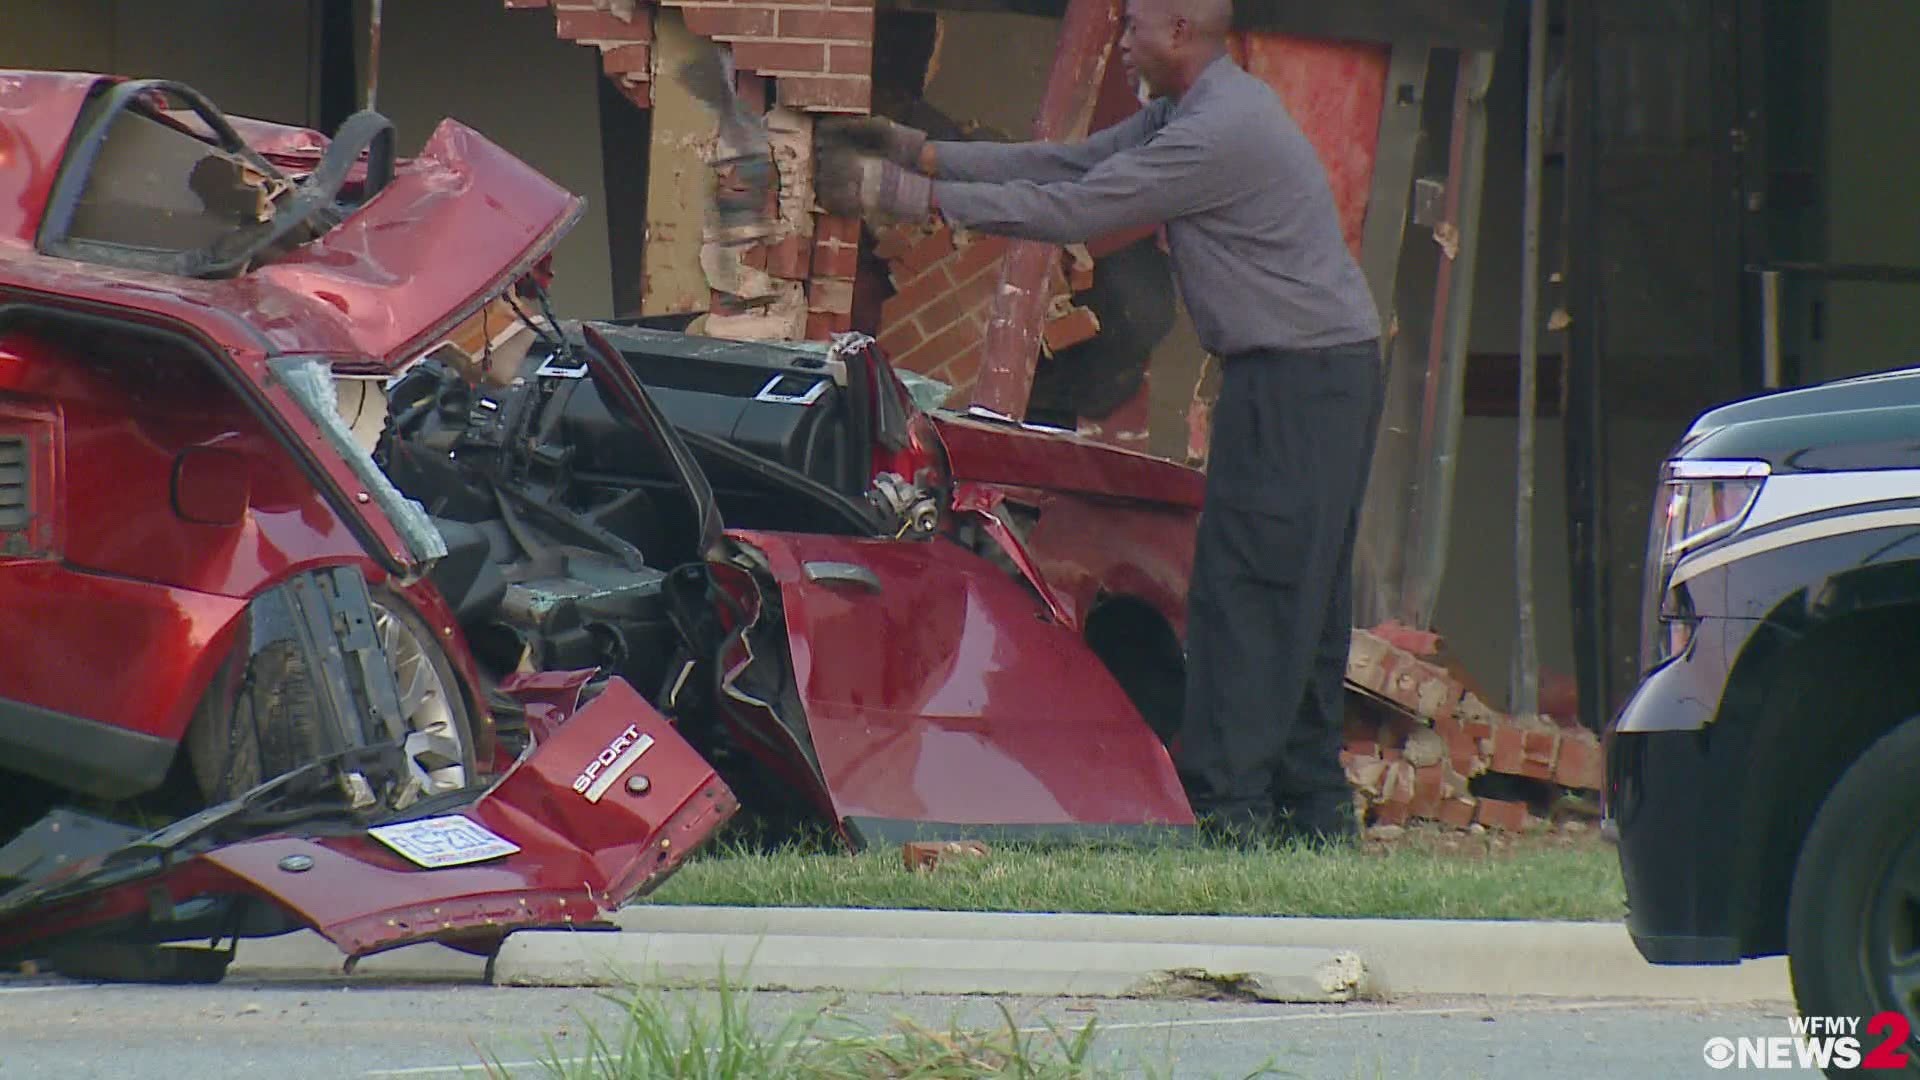 Crews work to clean up the wreckage after a man drove an SUV into a building in Greensboro Monday morning.